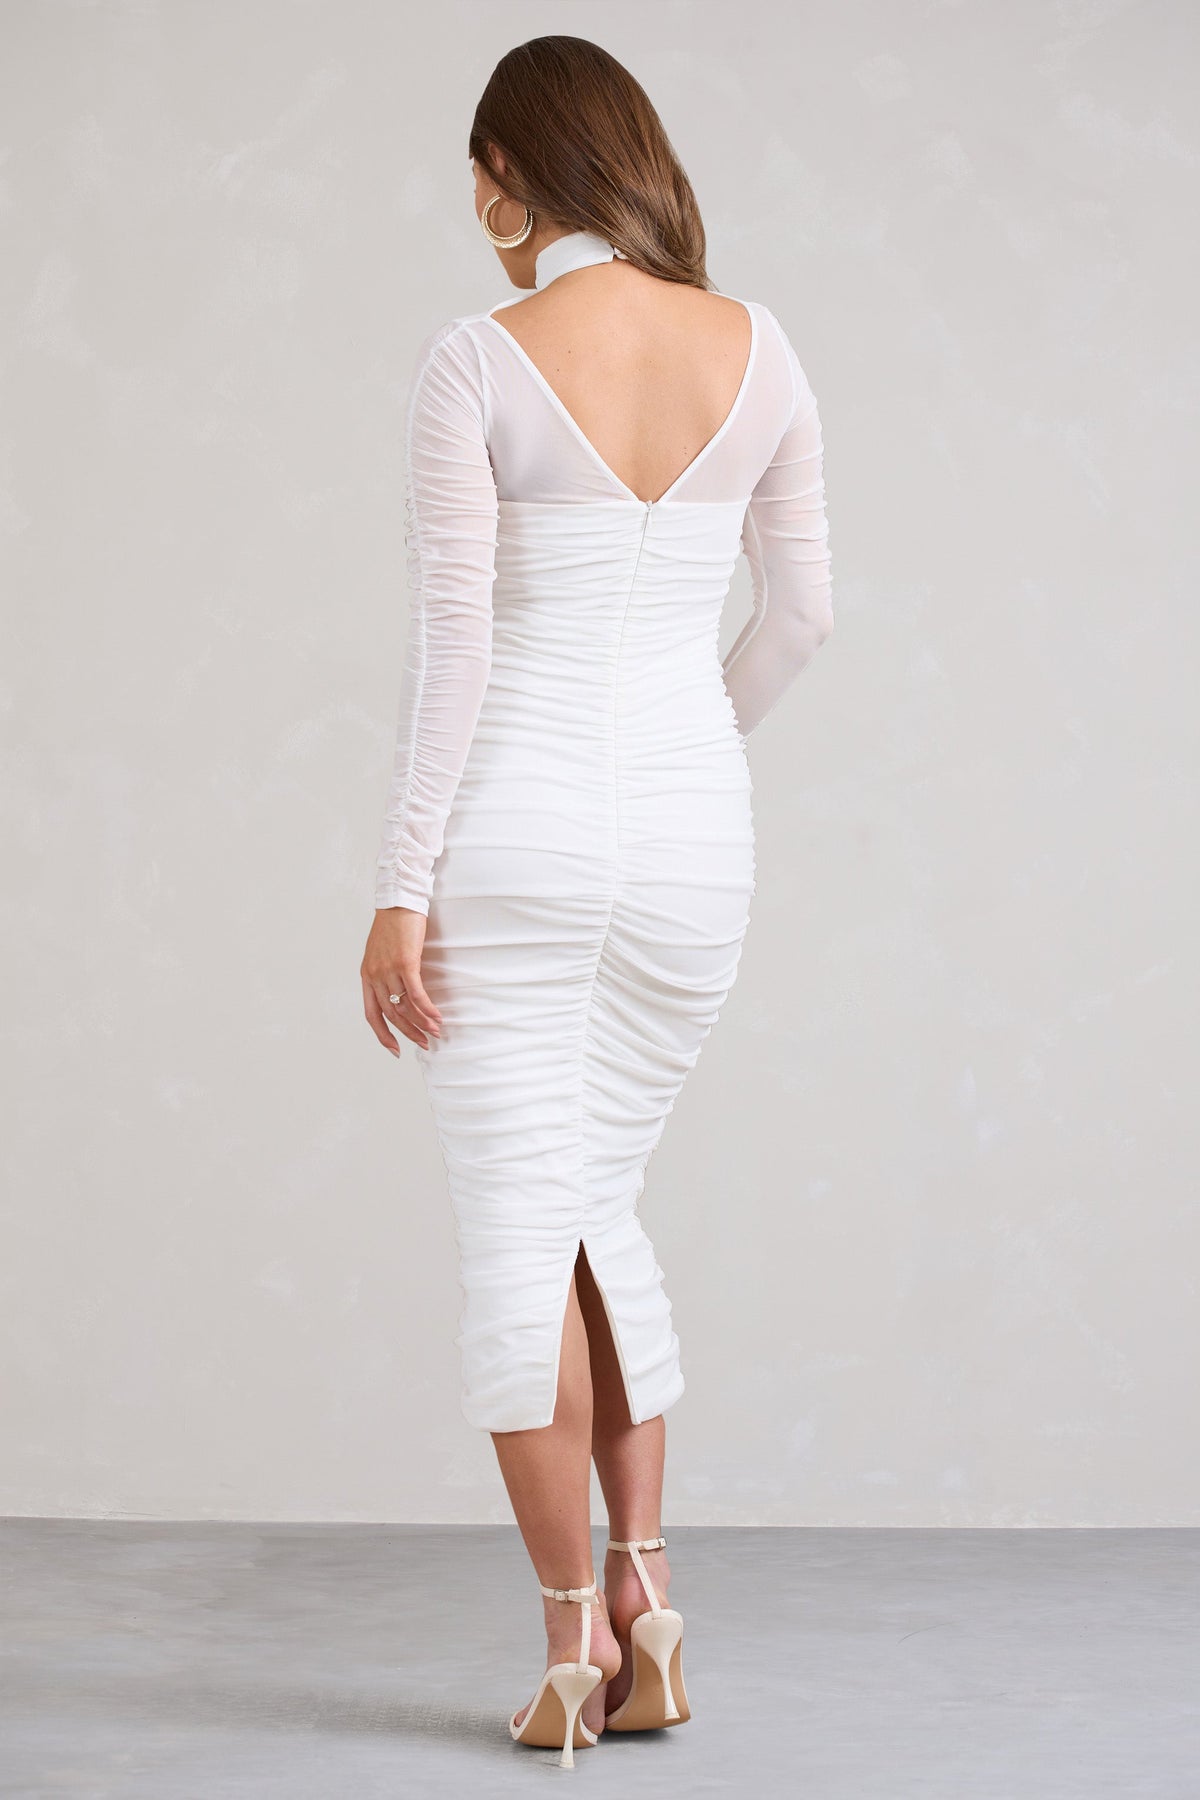 Oh Baby White Maternity One Shoulder Bodycon Maxi Dress – Club L